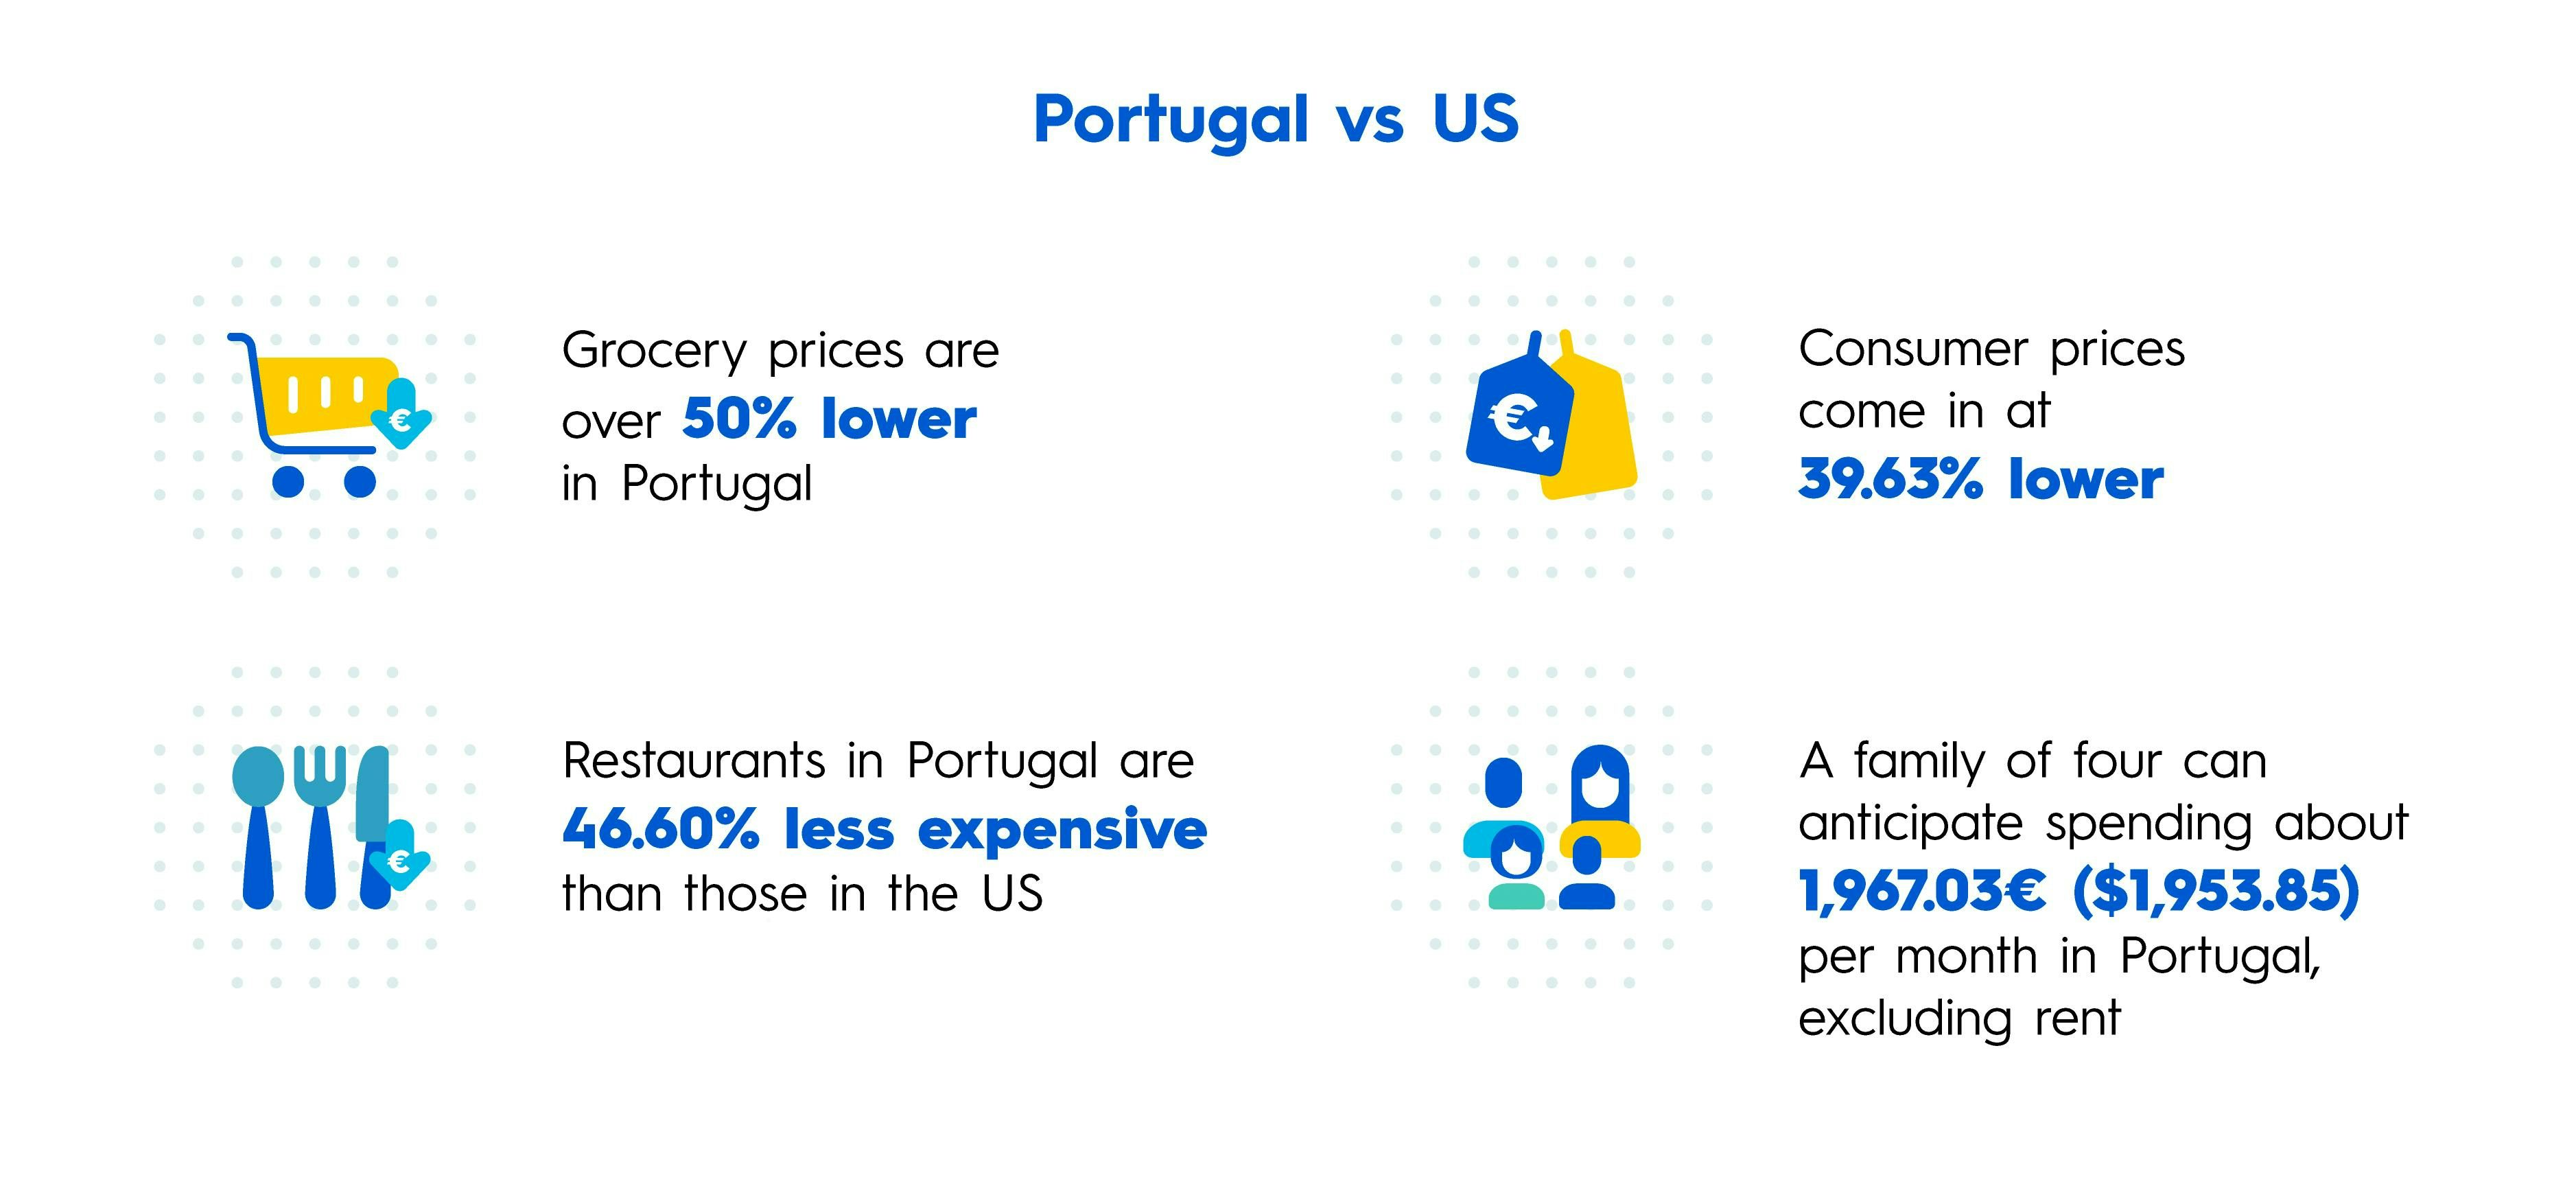 Infographic by moviinn comparing the cost of living between Portugal and the US, showcasing differences in prices for groceries, restaurants, consumer items, and monthly expenditures for a family of four.